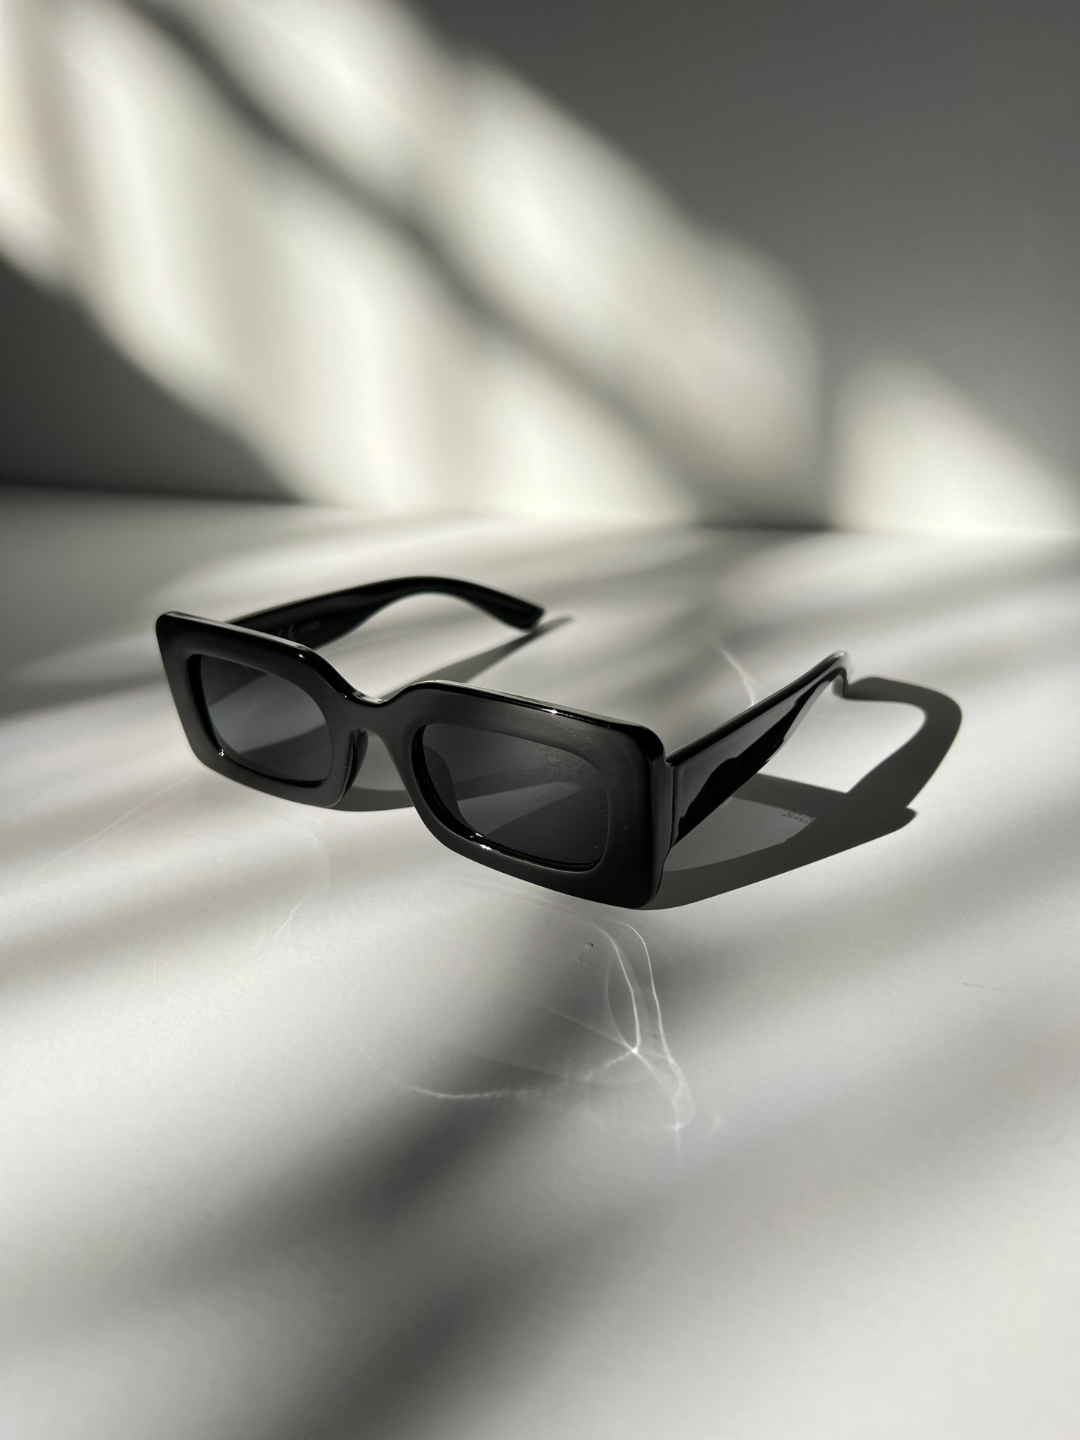 Black | Kids rectangle sunglasses in black, on a grey background with areas of sunlight, creating shadows of the sunglasses.